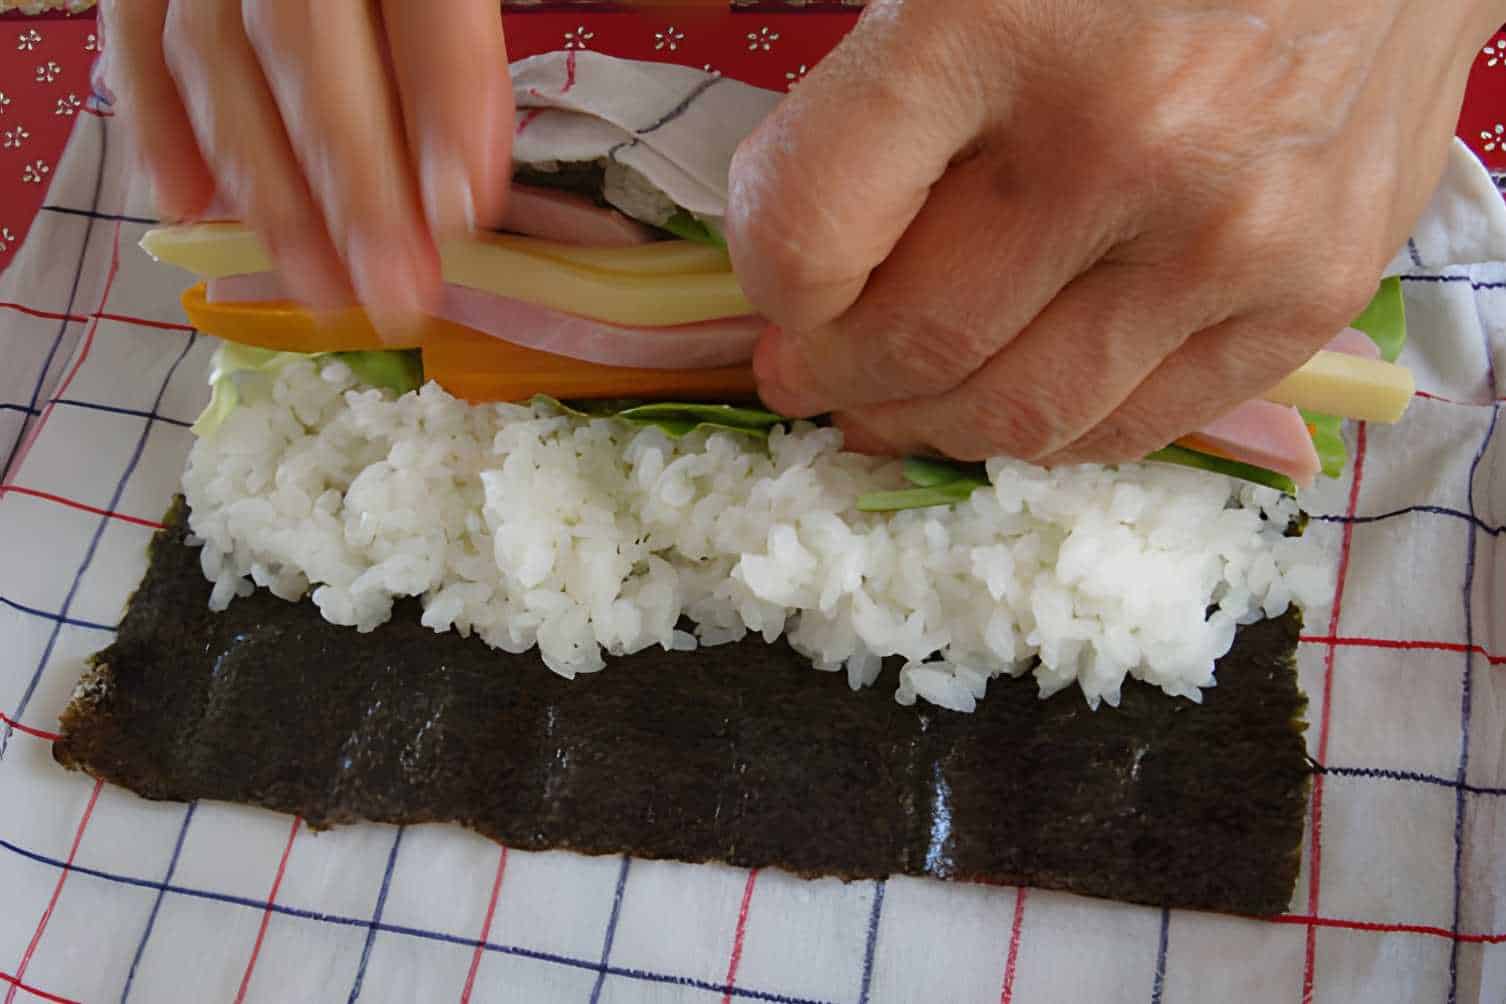 Europa Bestrating schuintrekken 7 Easy Steps to Roll Sushi Without a Mat